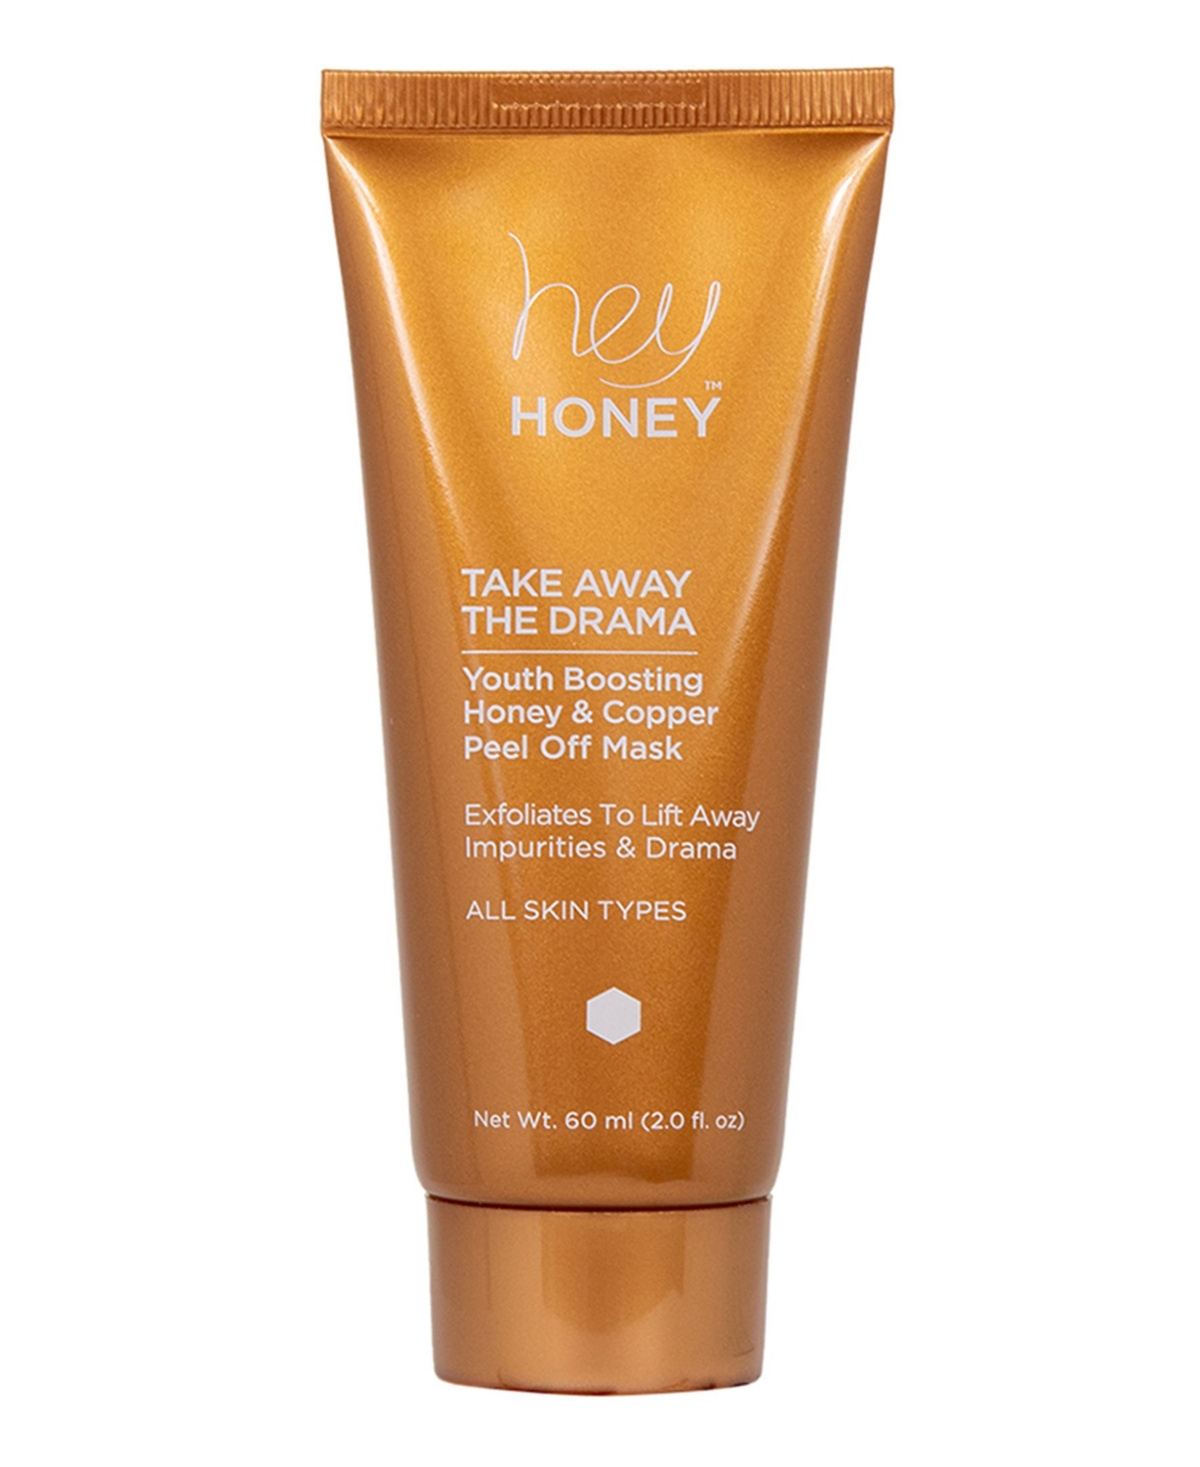 Take Away The Drama Youth Boosting Honey and Copper Peel Off Mask, 60 ml